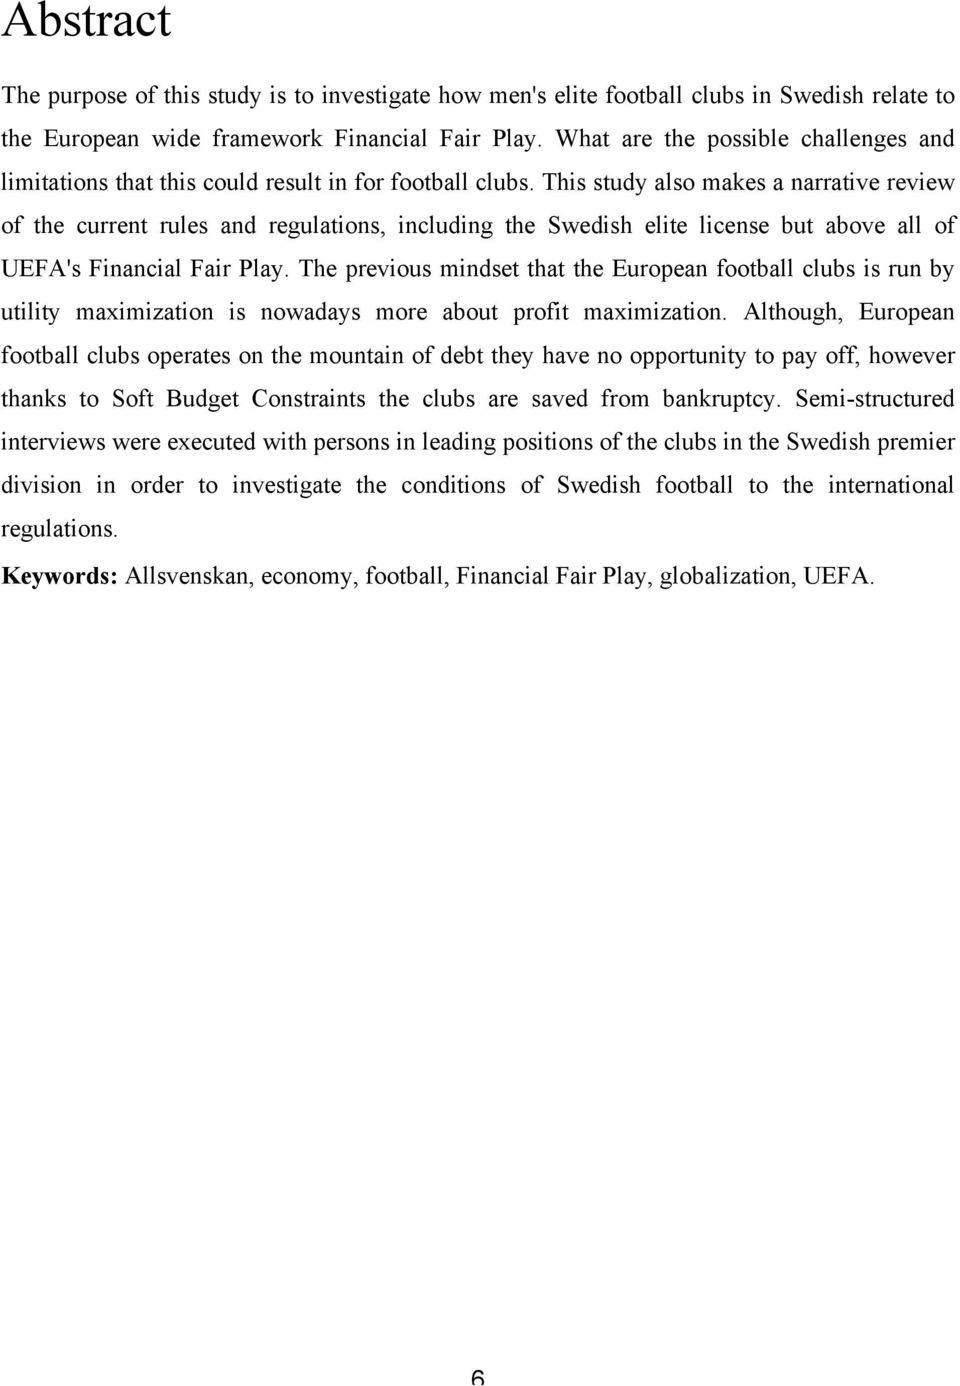 This study also makes a narrative review of the current rules and regulations, including the Swedish elite license but above all of UEFA's Financial Fair Play.